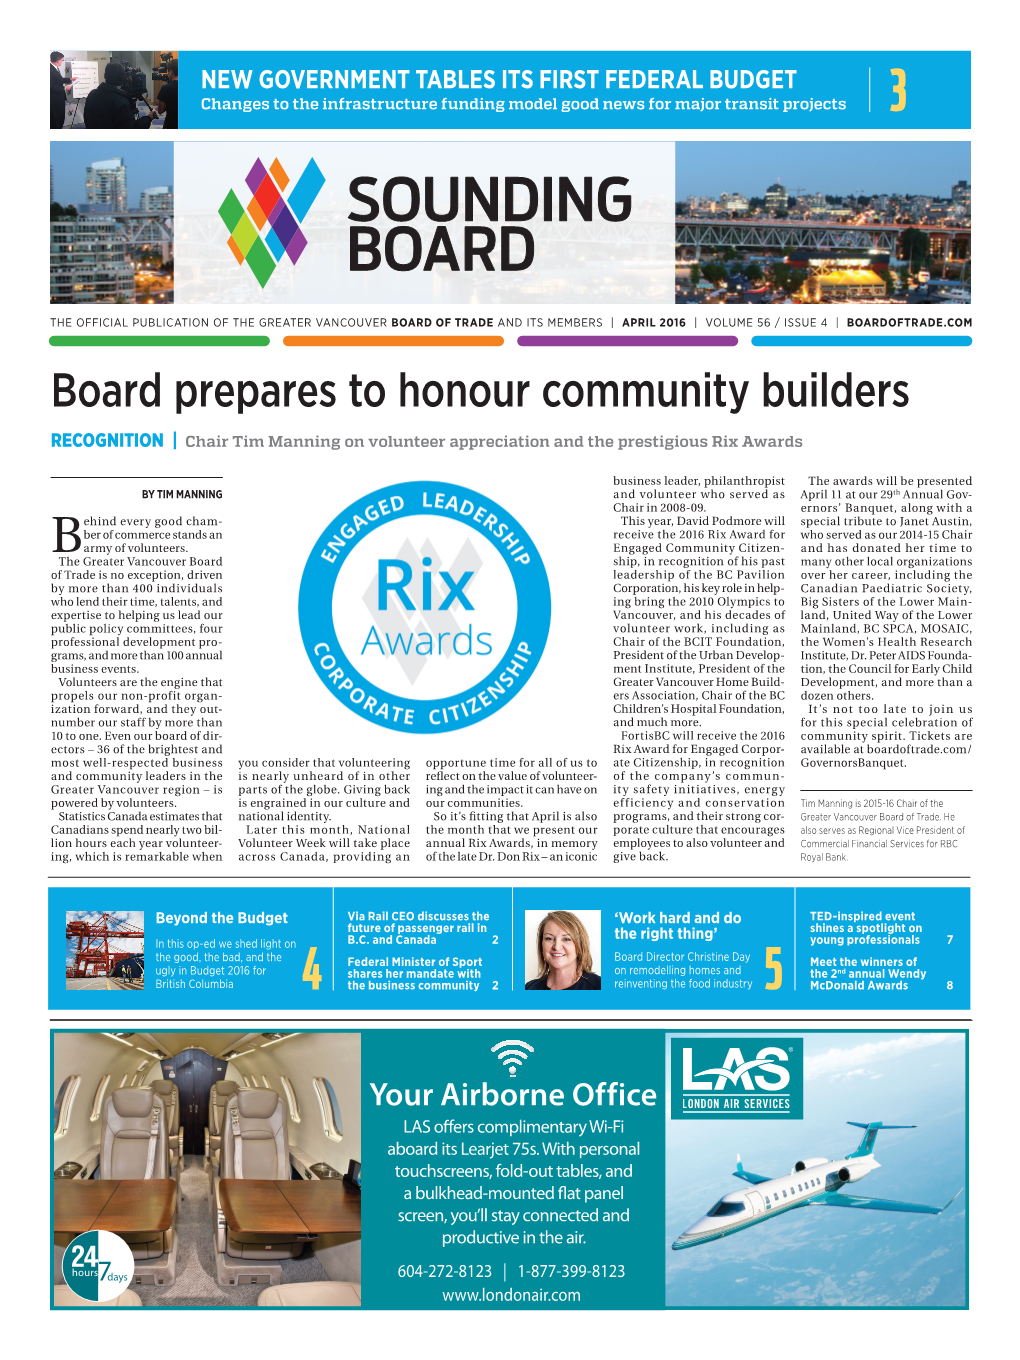 Board Prepares to Honour Community Builders Recognition | Chair Tim Manning on Volunteer Appreciation and the Prestigious Rix Awards